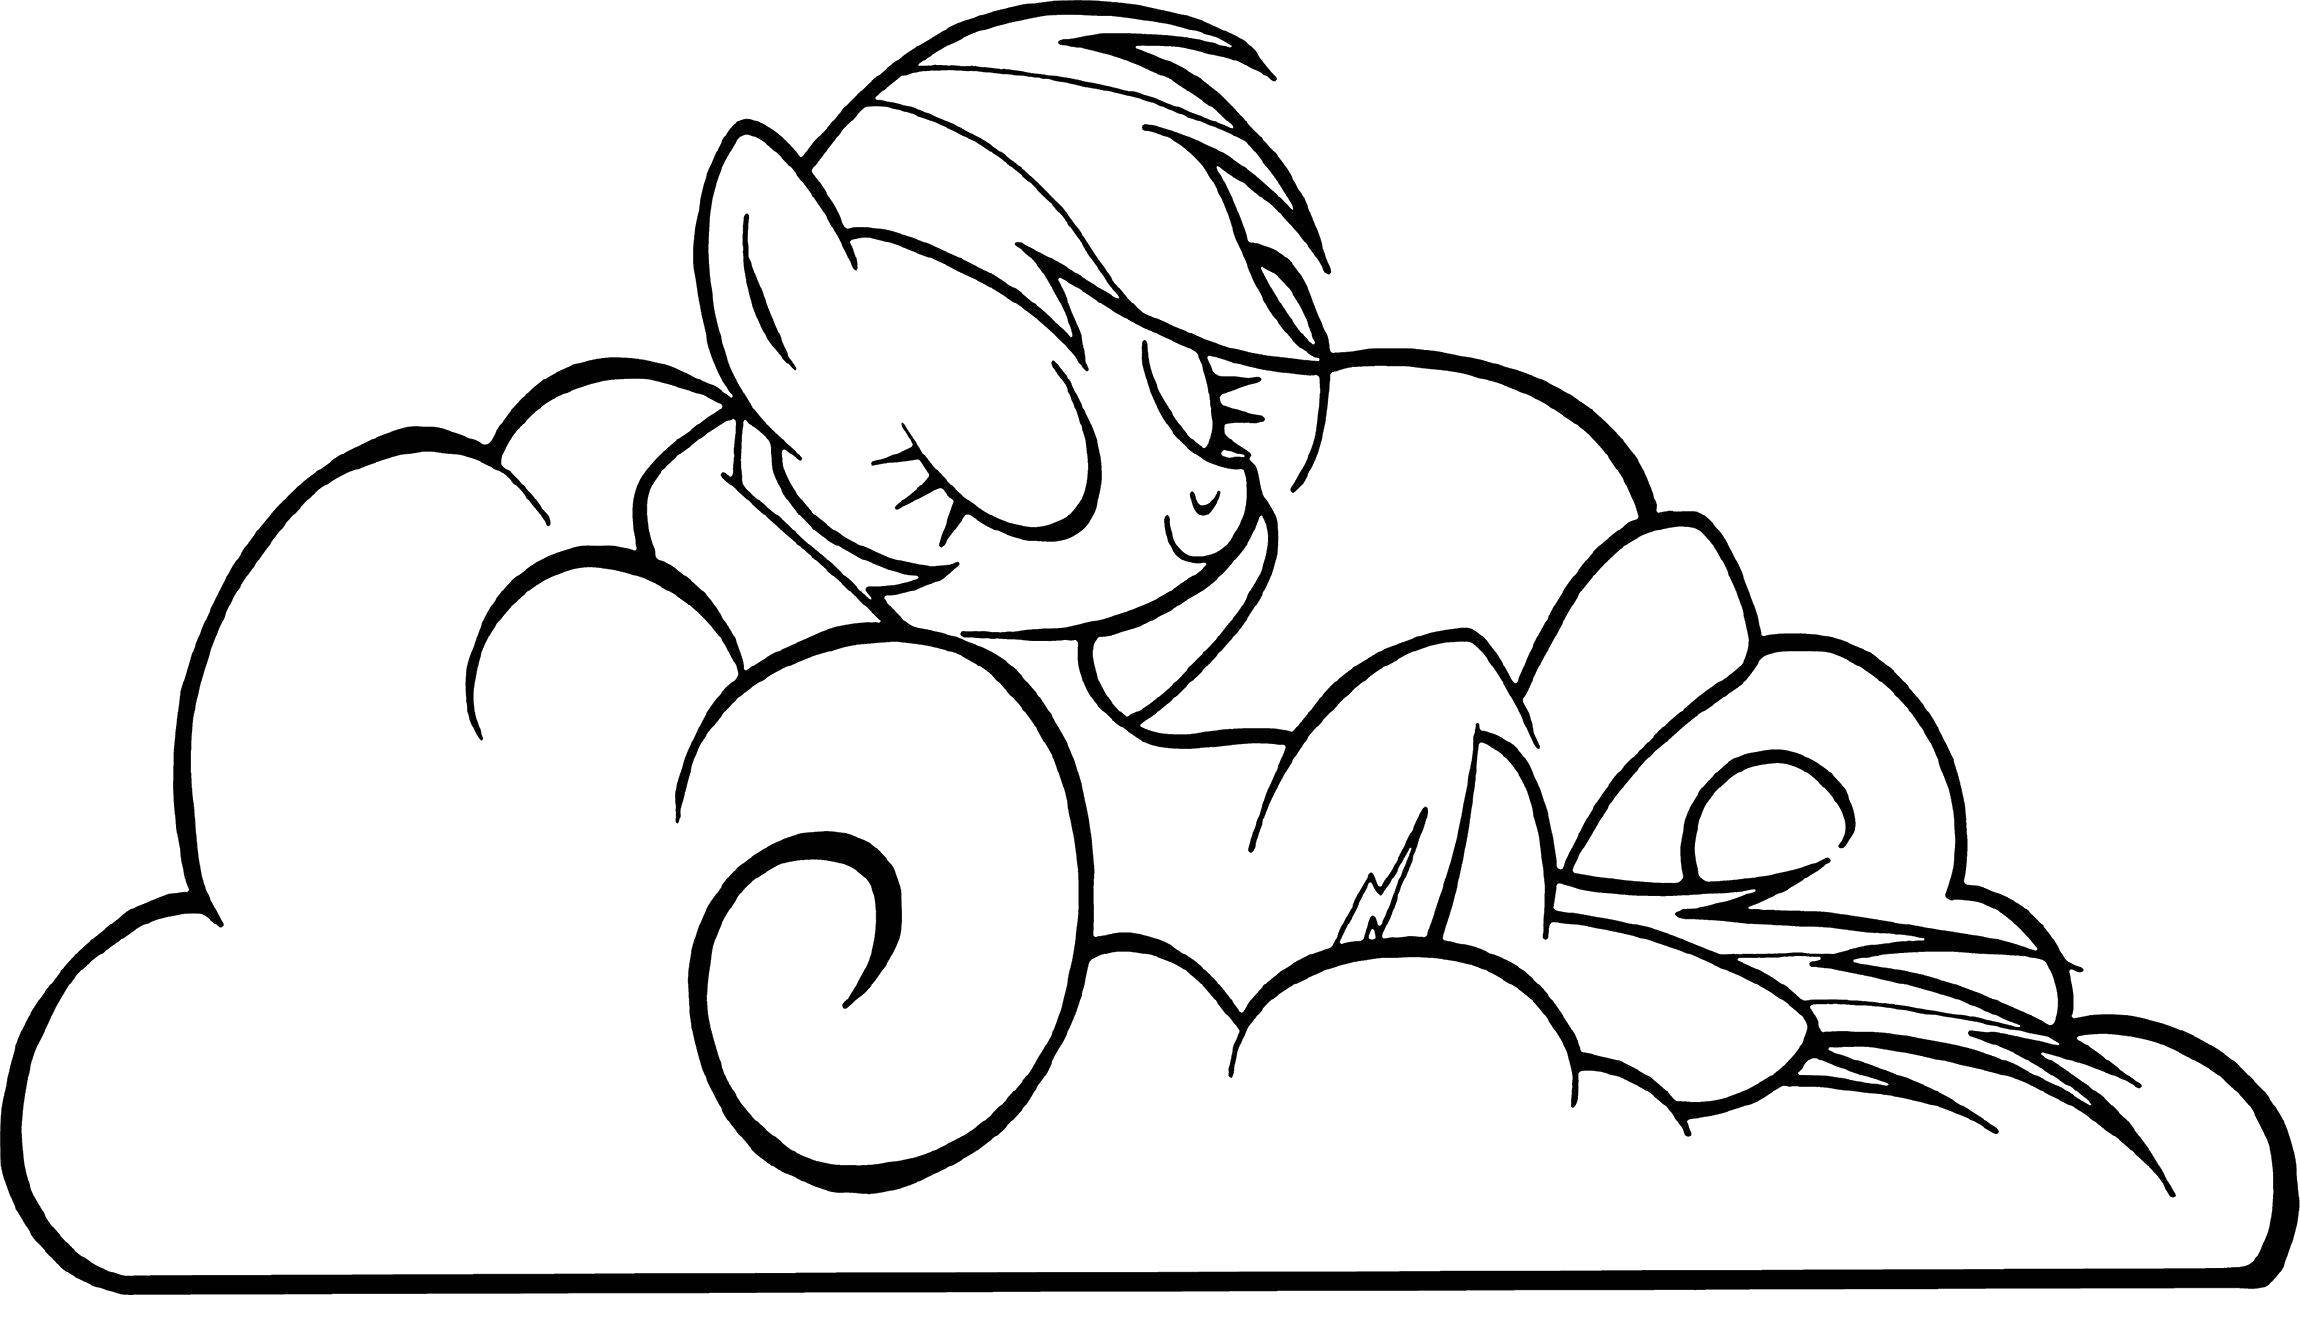 Coloring Pony on a cloud. Category Ponies. Tags:  Pony, My little pony.